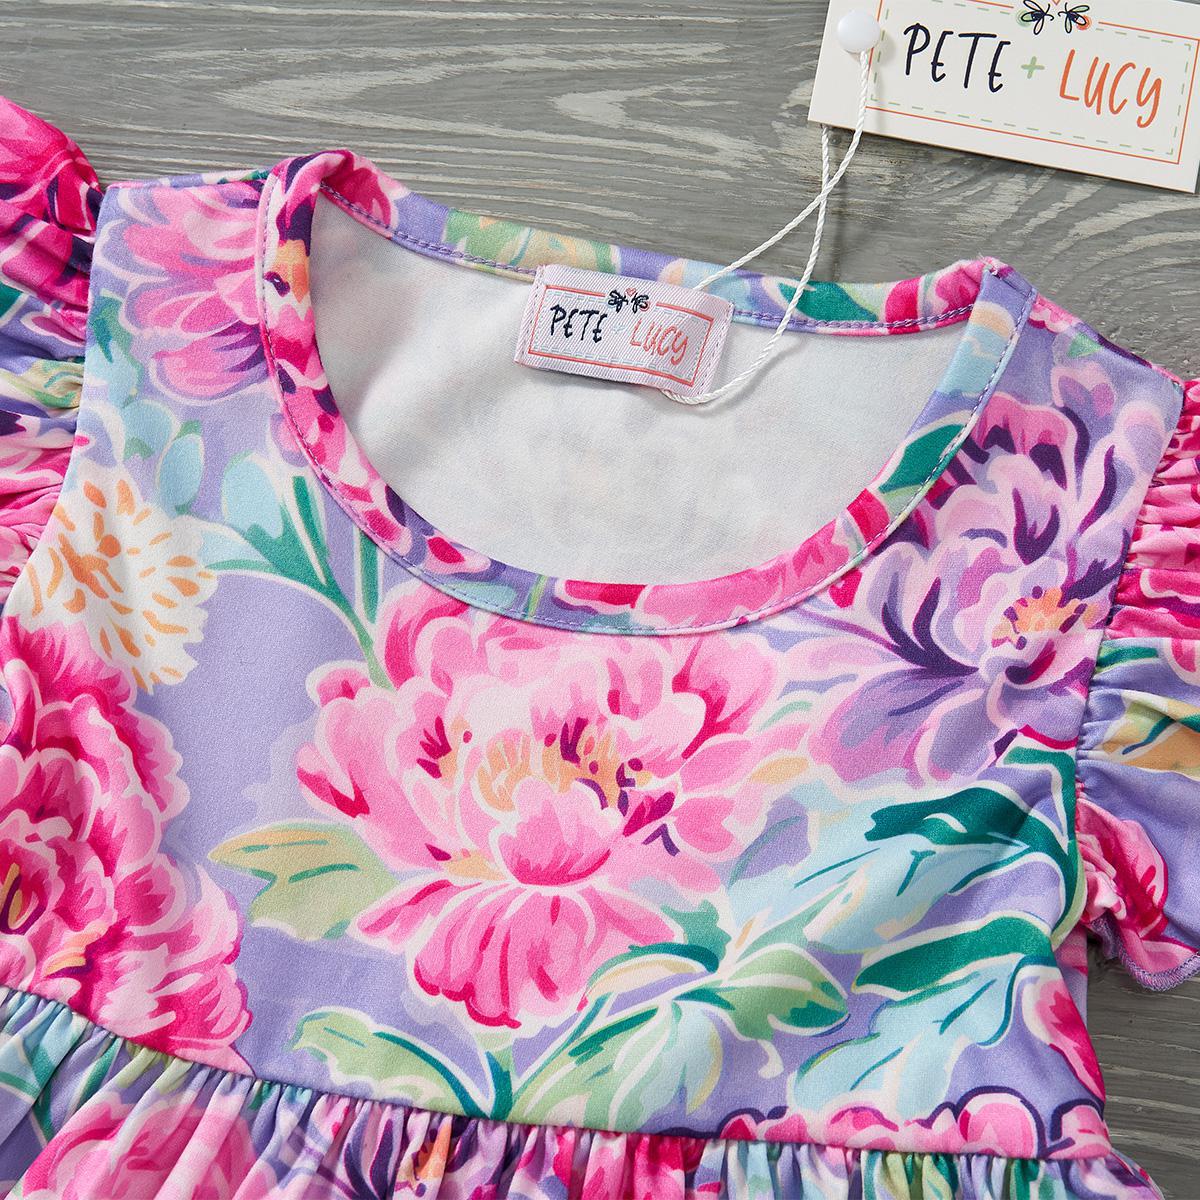 (Preorder) Blushing Peonies Girl’s Infant Romper by Pete + Lucy